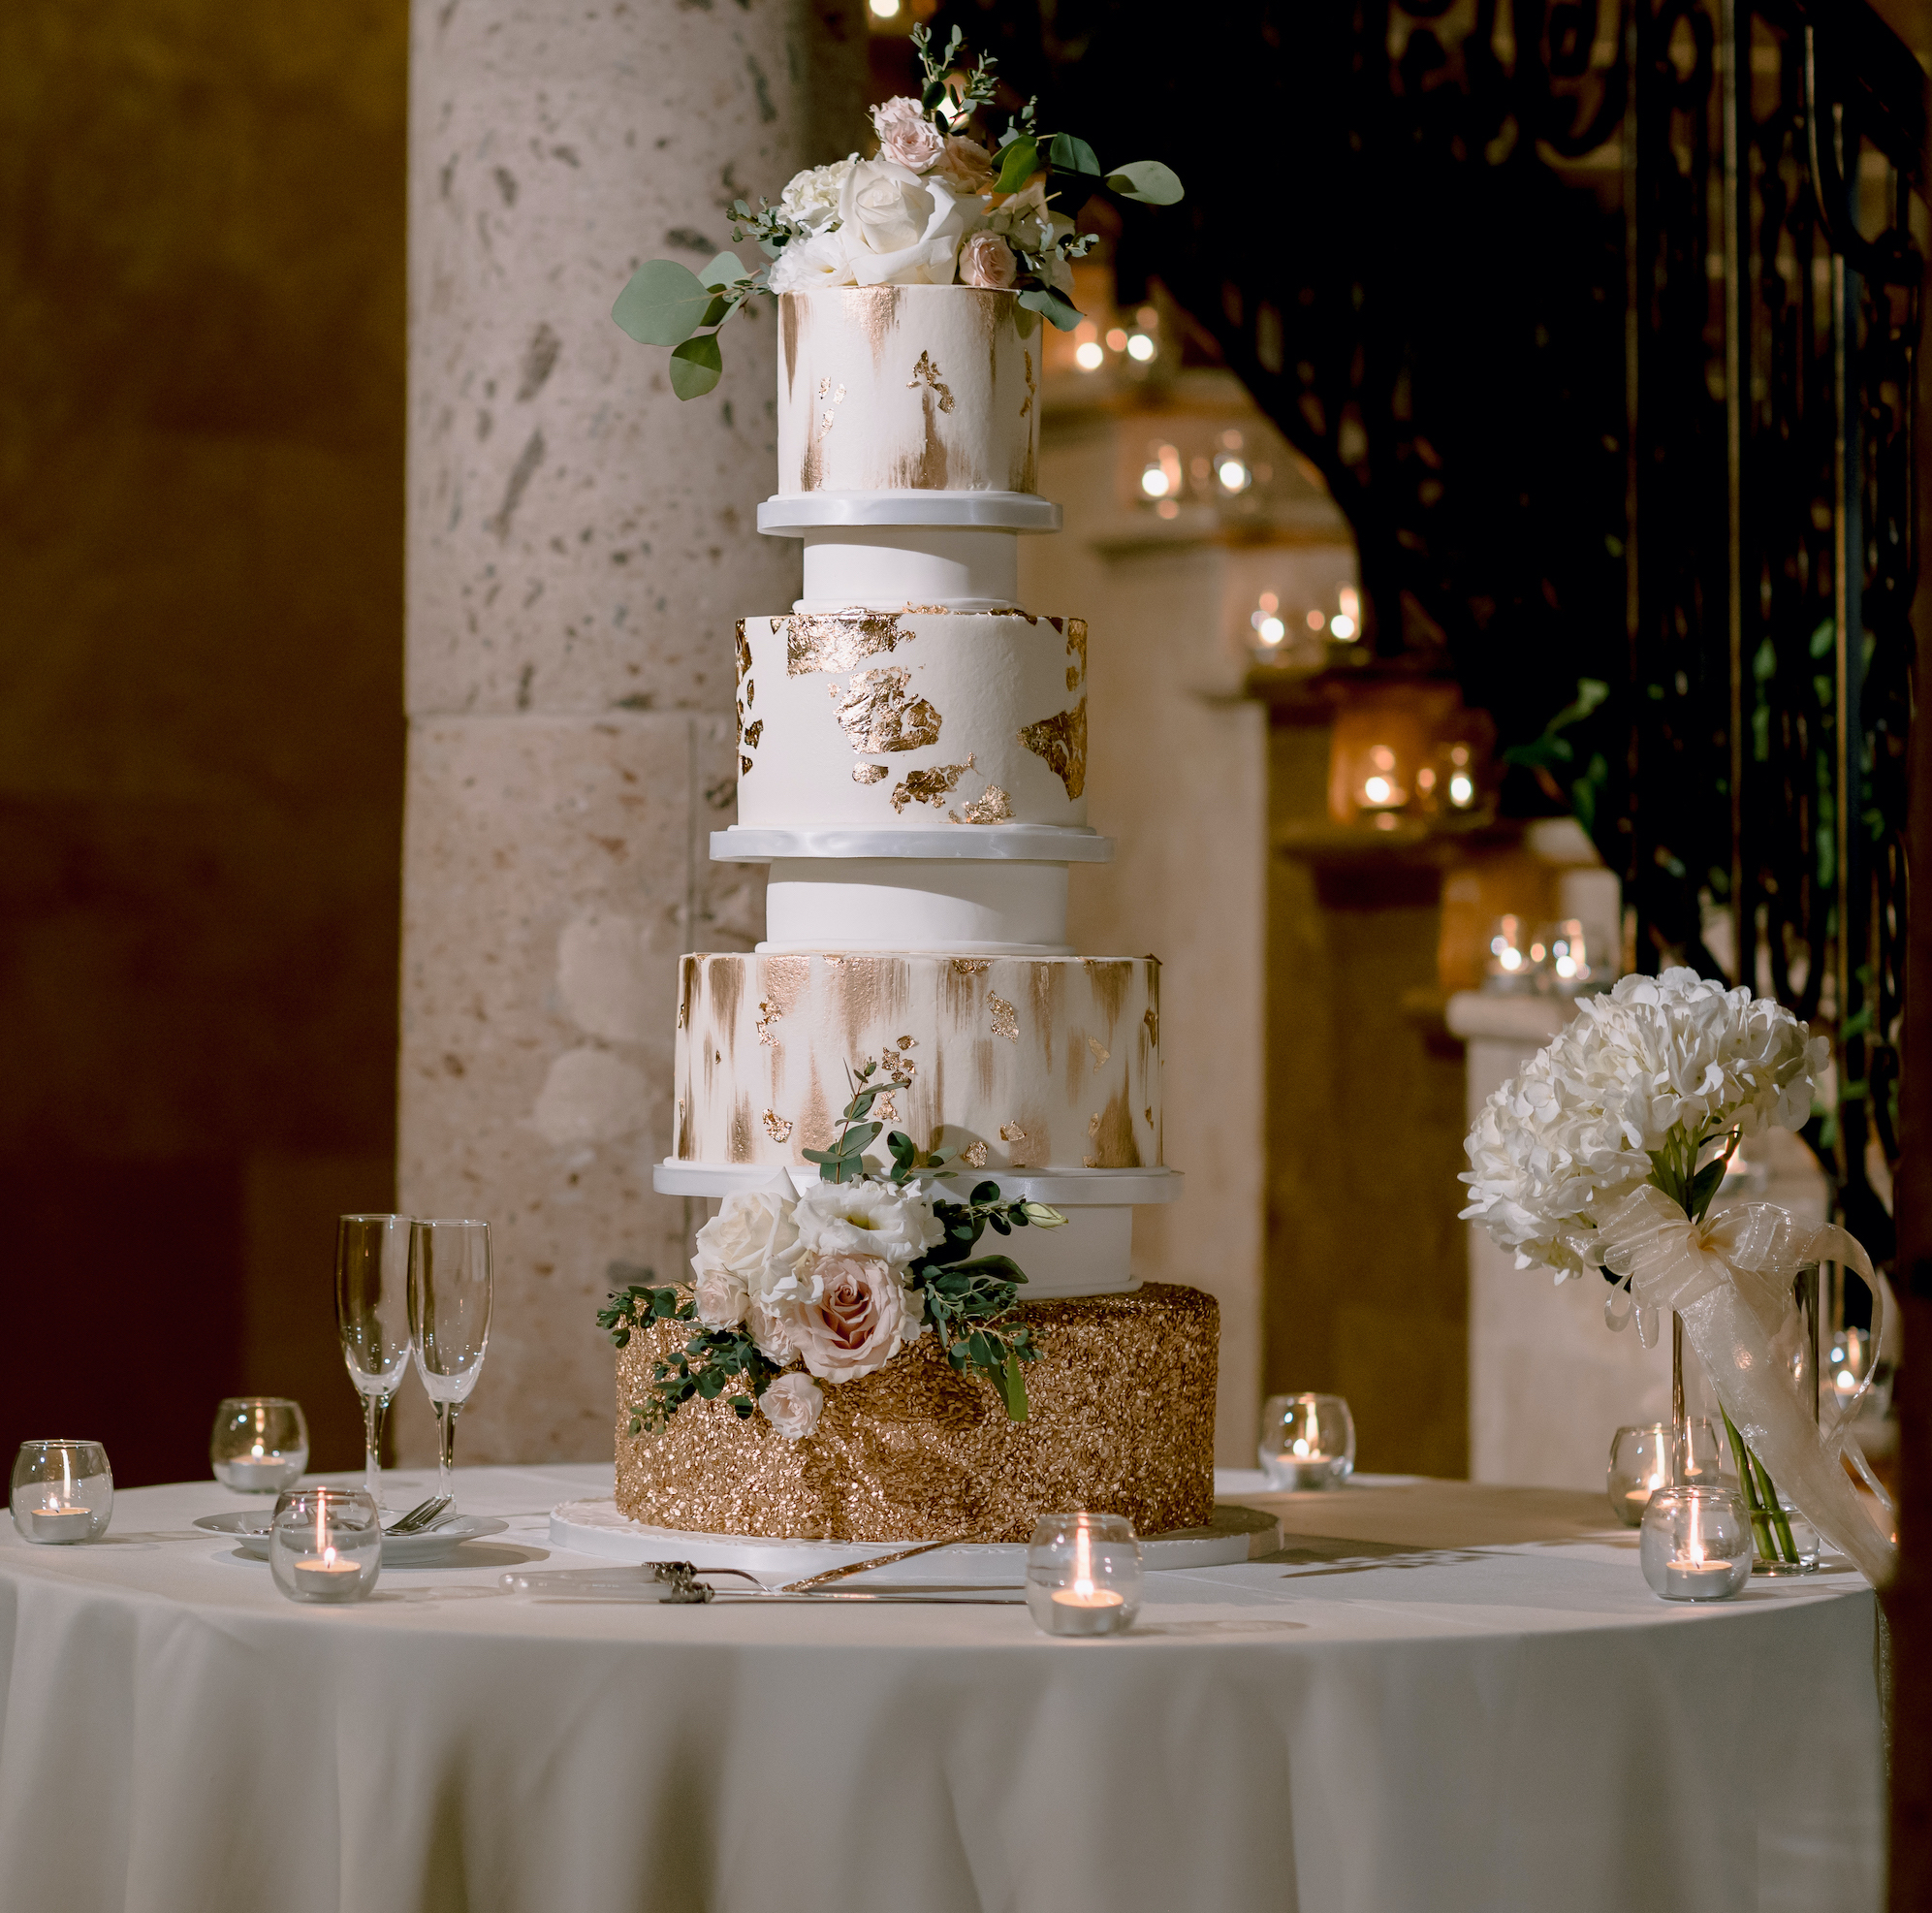 The wedding cake has glittery gold accents and white frosting.